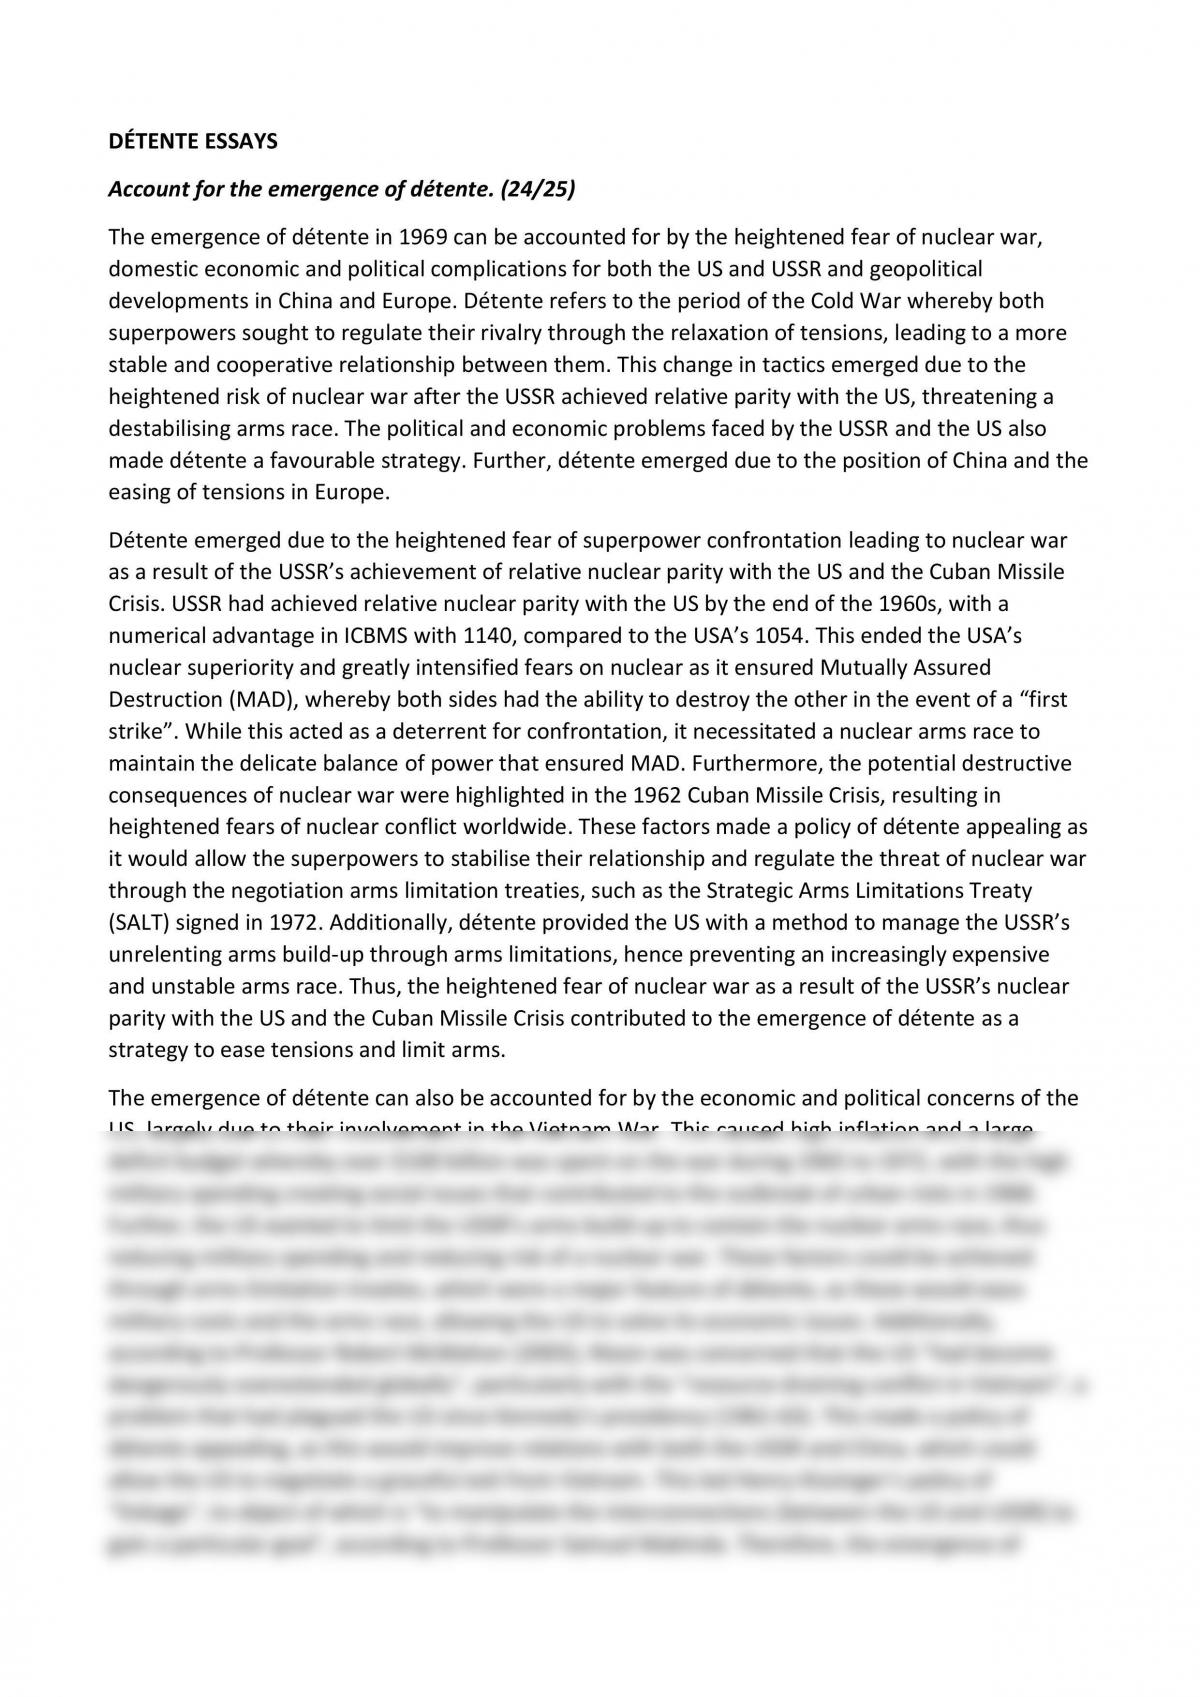 Emergence of detente essay - Page 1